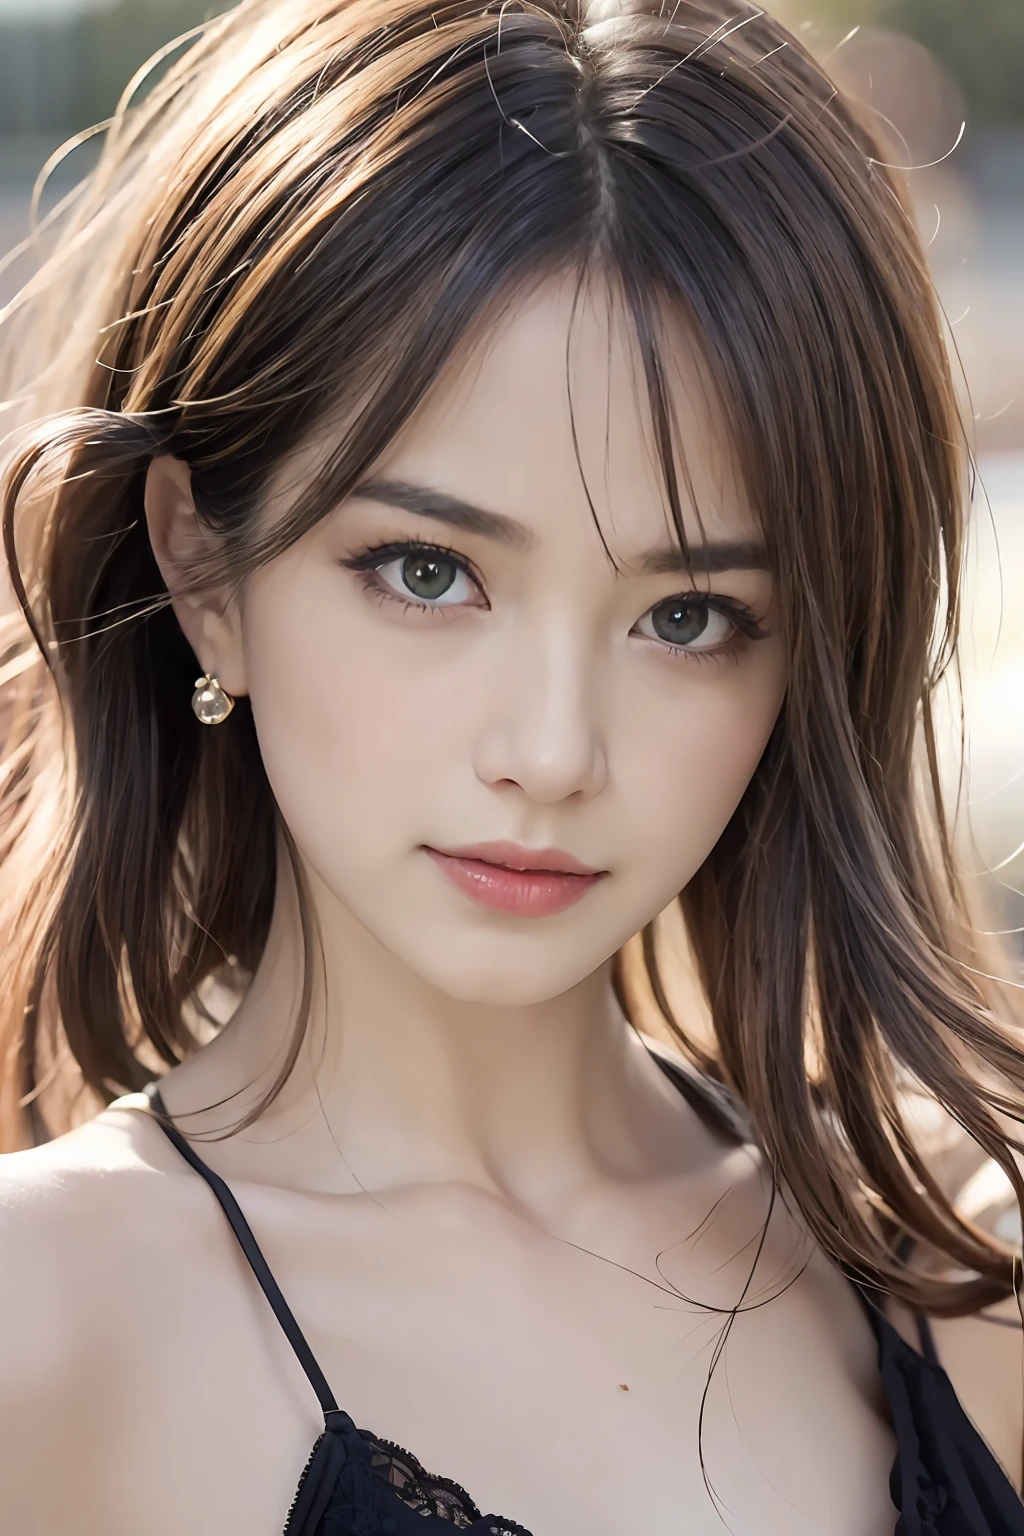 (8K, Raw photo, Photorealistic:1.25) ,( Lip gloss,Glossy finish, Glossy skin, Best Quality, 超A high resolution, chromatic abberation, Caustics, Wide light, Natural Shadow) look with serenity and goddess-like bliss to the spectators,(depth of fields:1.6), (colorful unfocused lights on background:1.2) ,very natural make-up,Shot on a cloudy day . Slender eyes.Downcast eyes. The distant look in her eyes,55 years old.Wearing a gorgeous summer dress、(The upper part of the body)(Long gorgeous hair)(Stylish as a professional model)